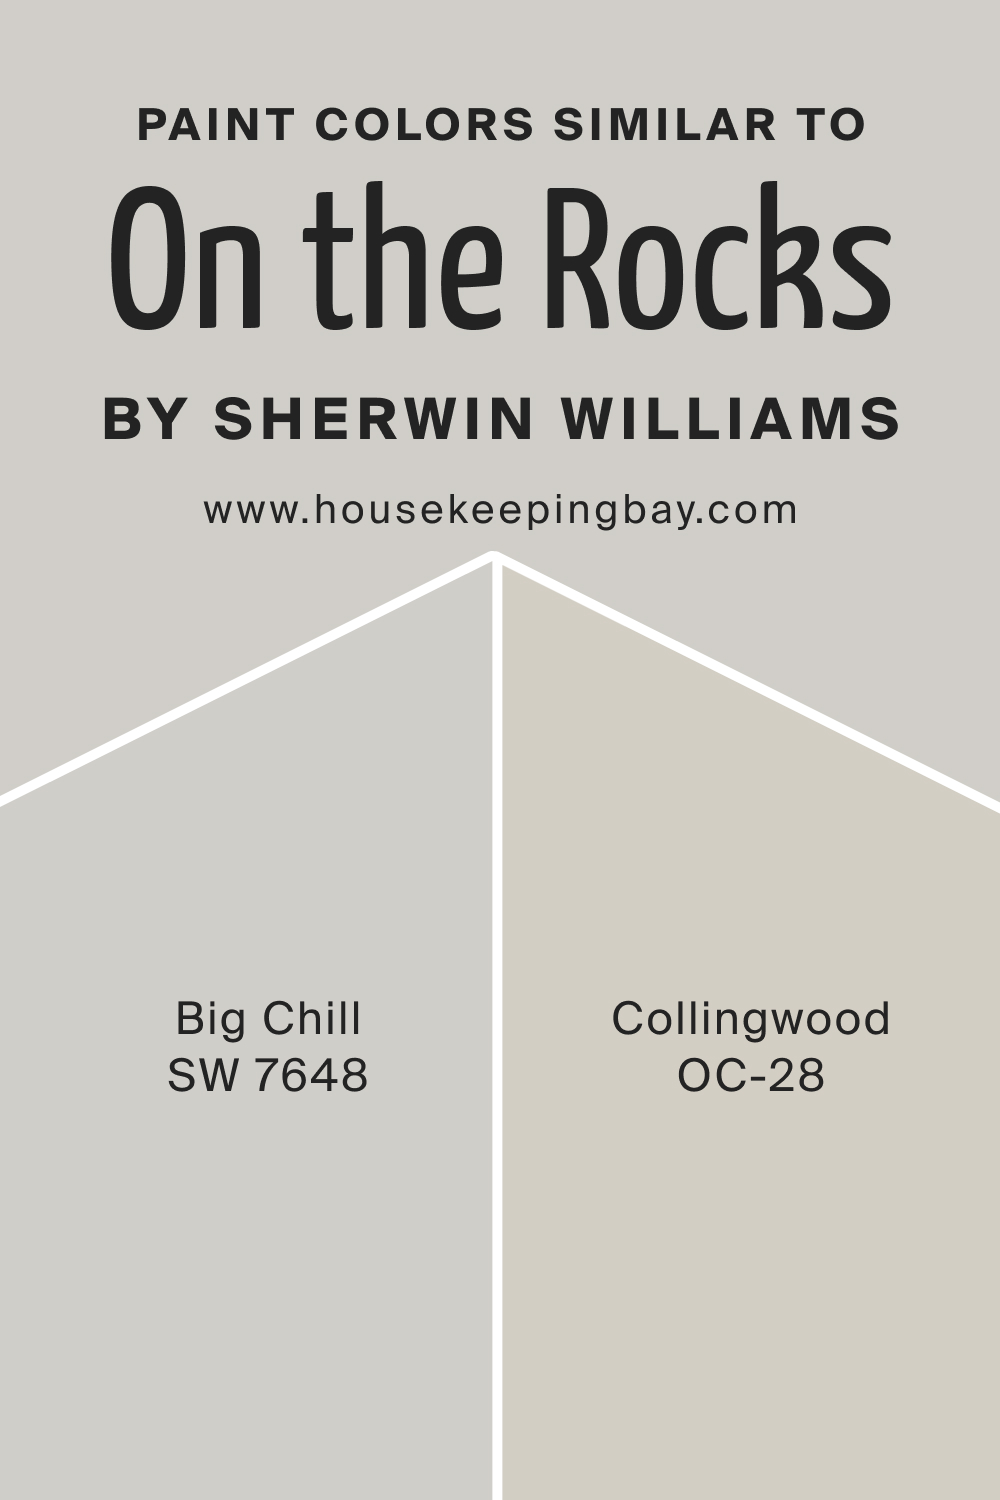 Paint Colors Similar to On the Rocks SW 7671 by Sherwin Williams